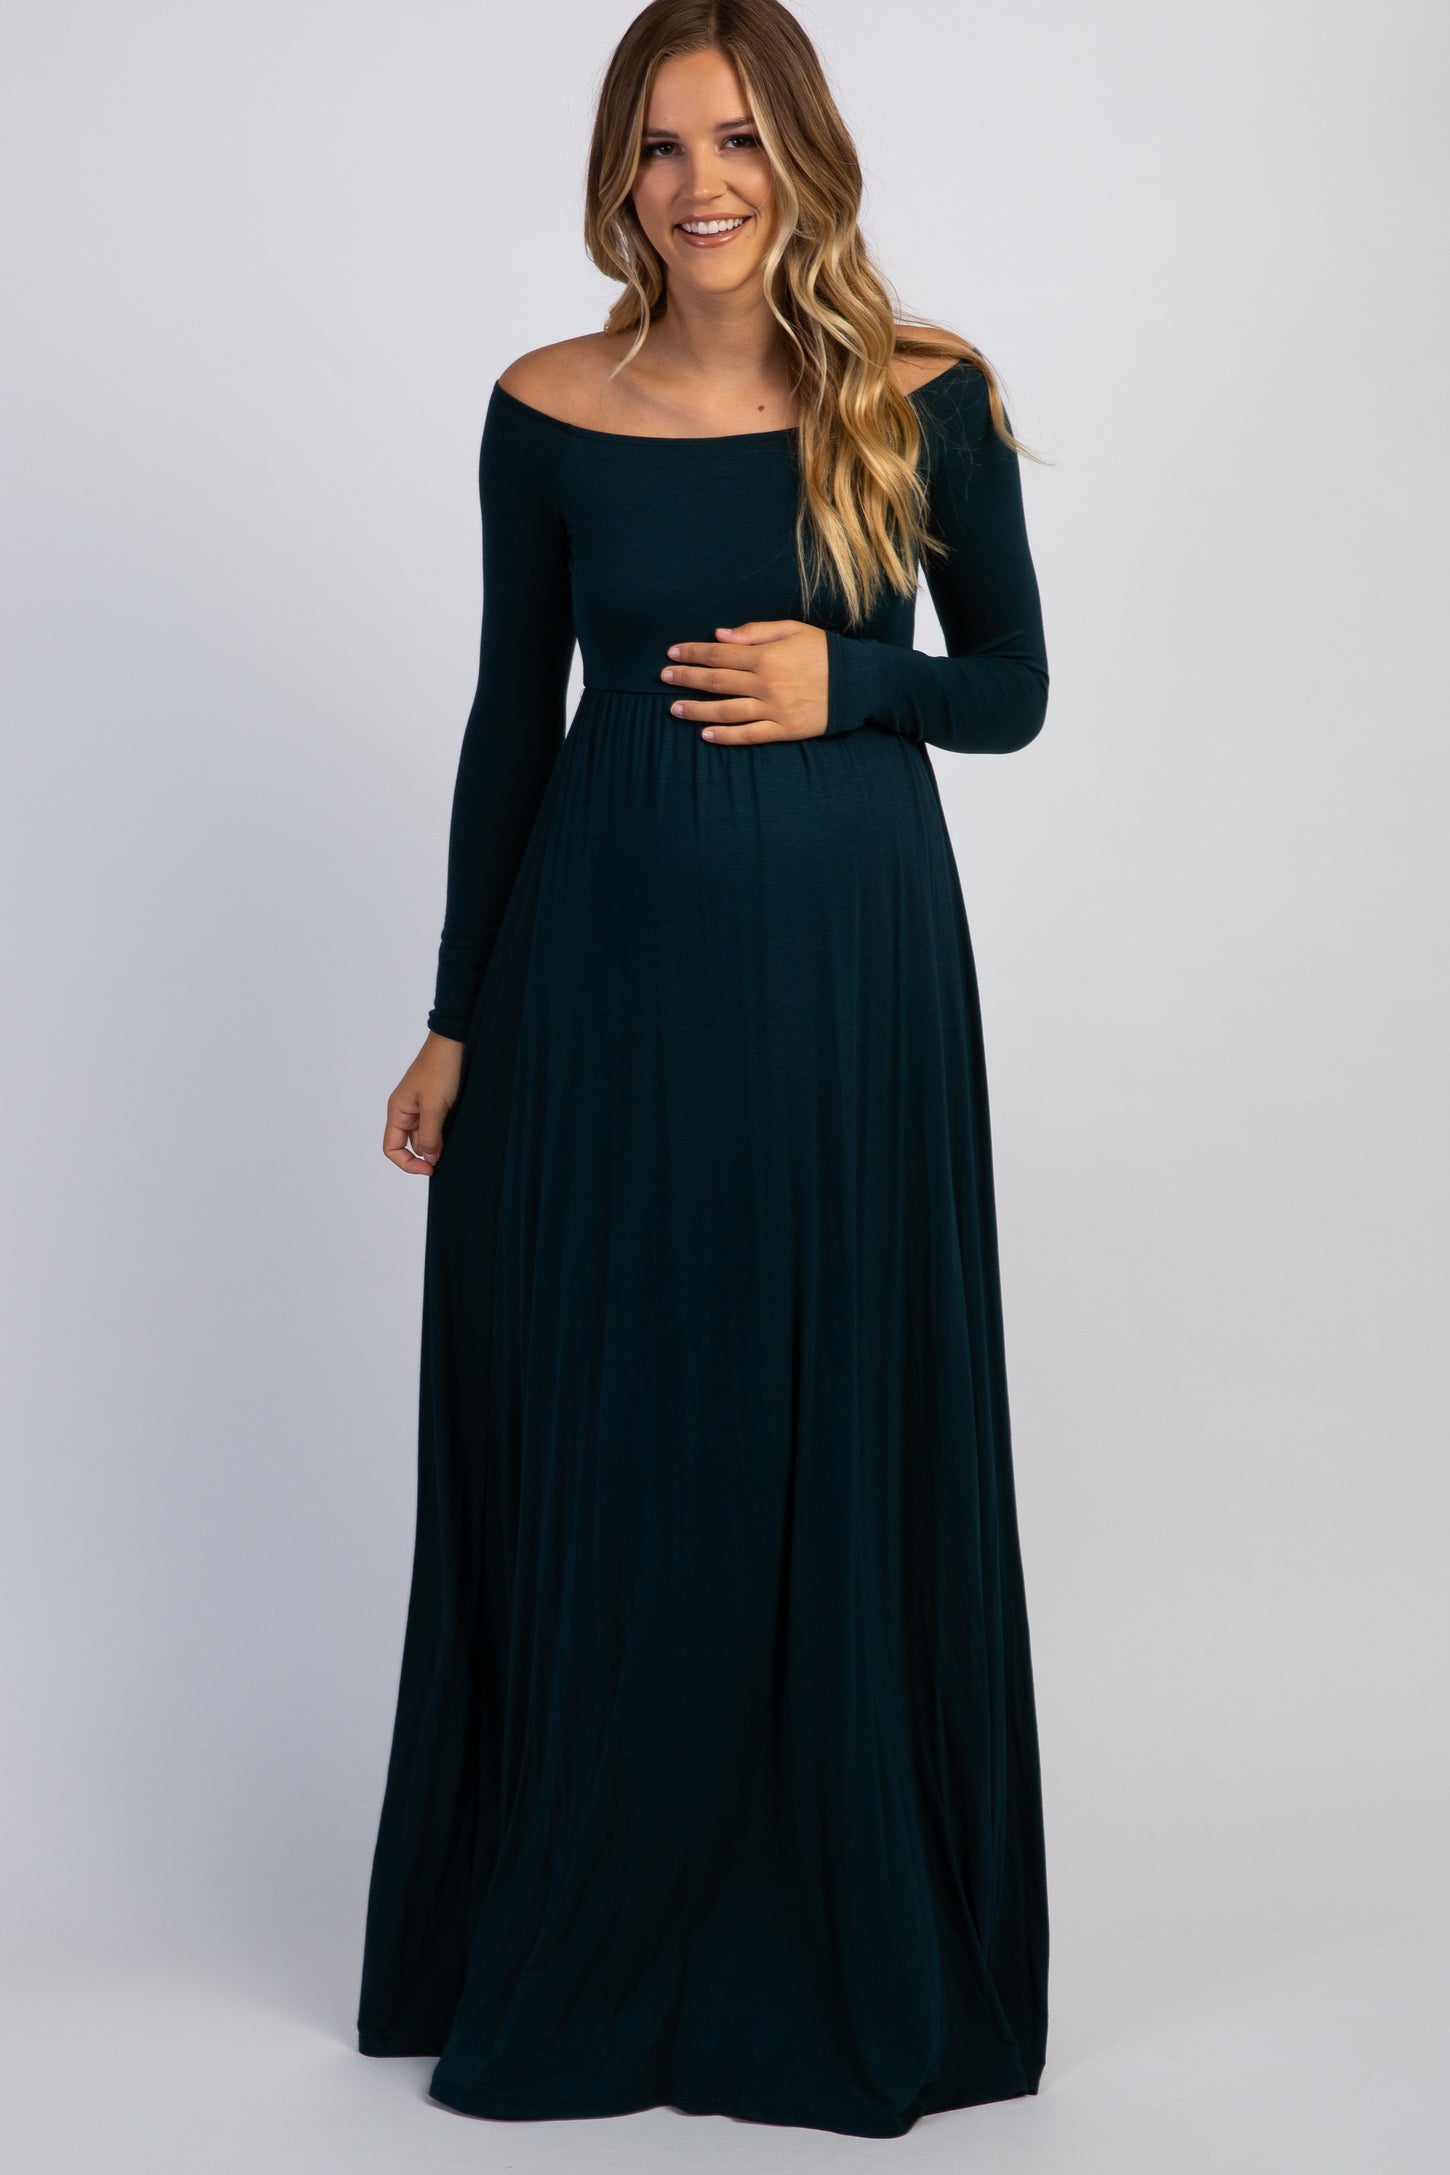 Green Ditsy Floral Ruffle Accent Maternity Maxi Dress– PinkBlush